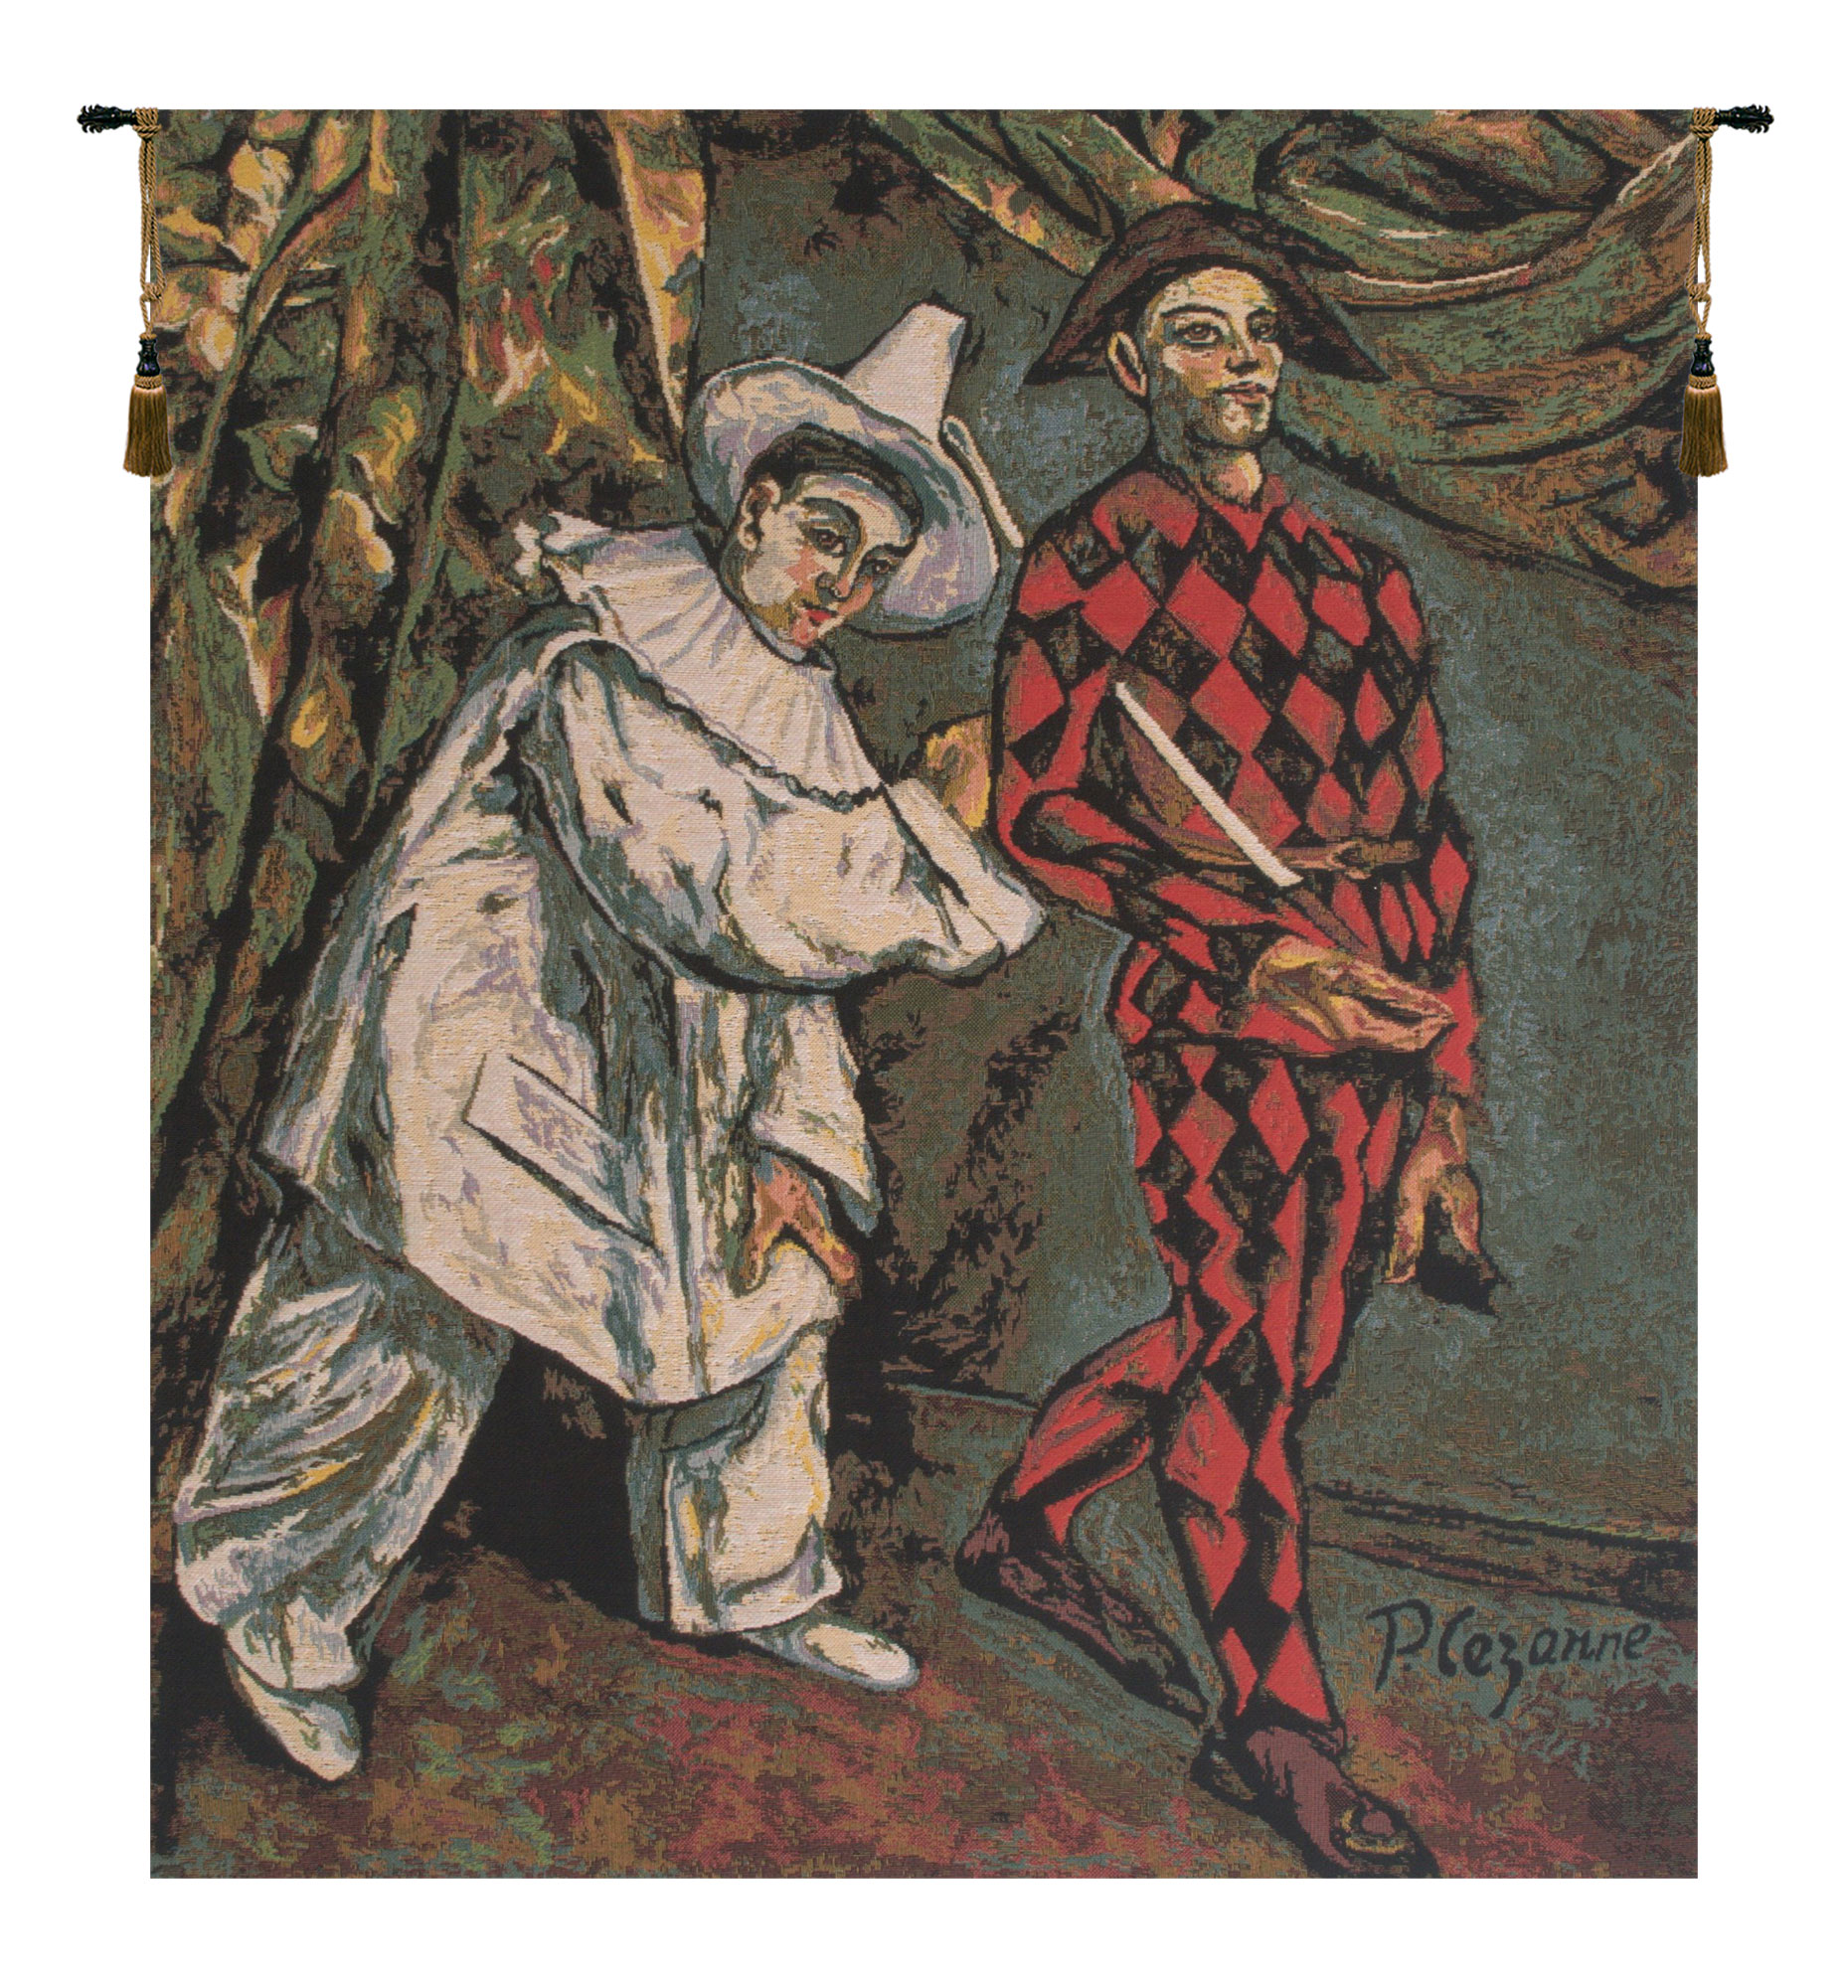 Pierrot and Harlequin European Tapestry - Wall Art Hanging Decor - 23x19 Inch